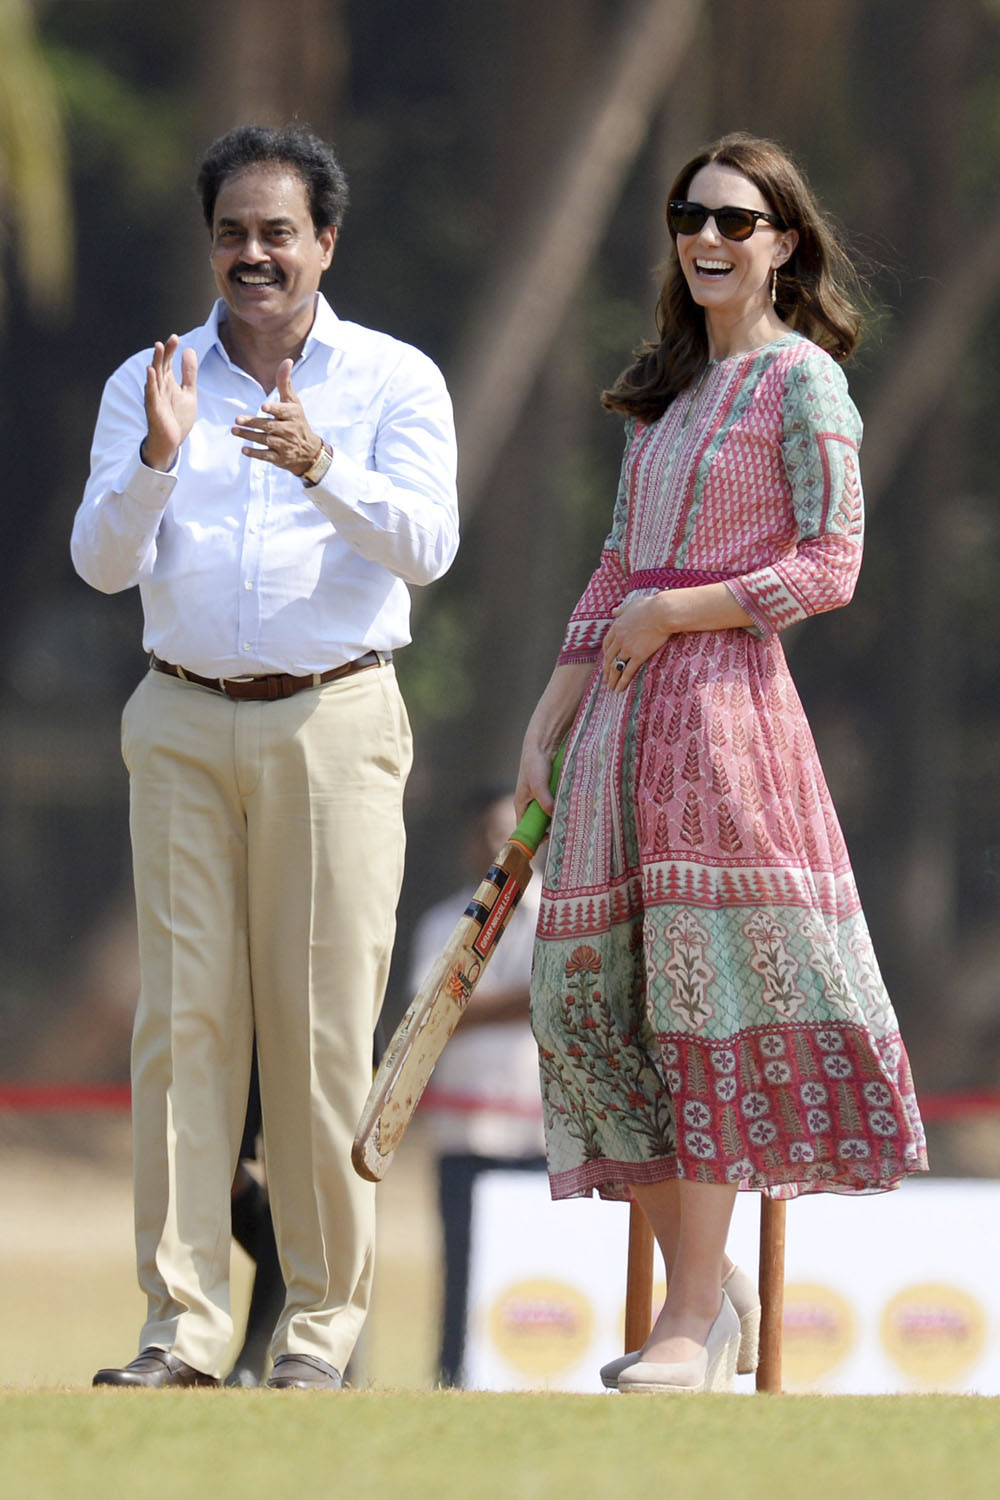 Kate paid tribute to Indian designer Anita Dongre, wearing one of her custom designs during a visit to Mumbai's slums and to play a cricket match in the park.